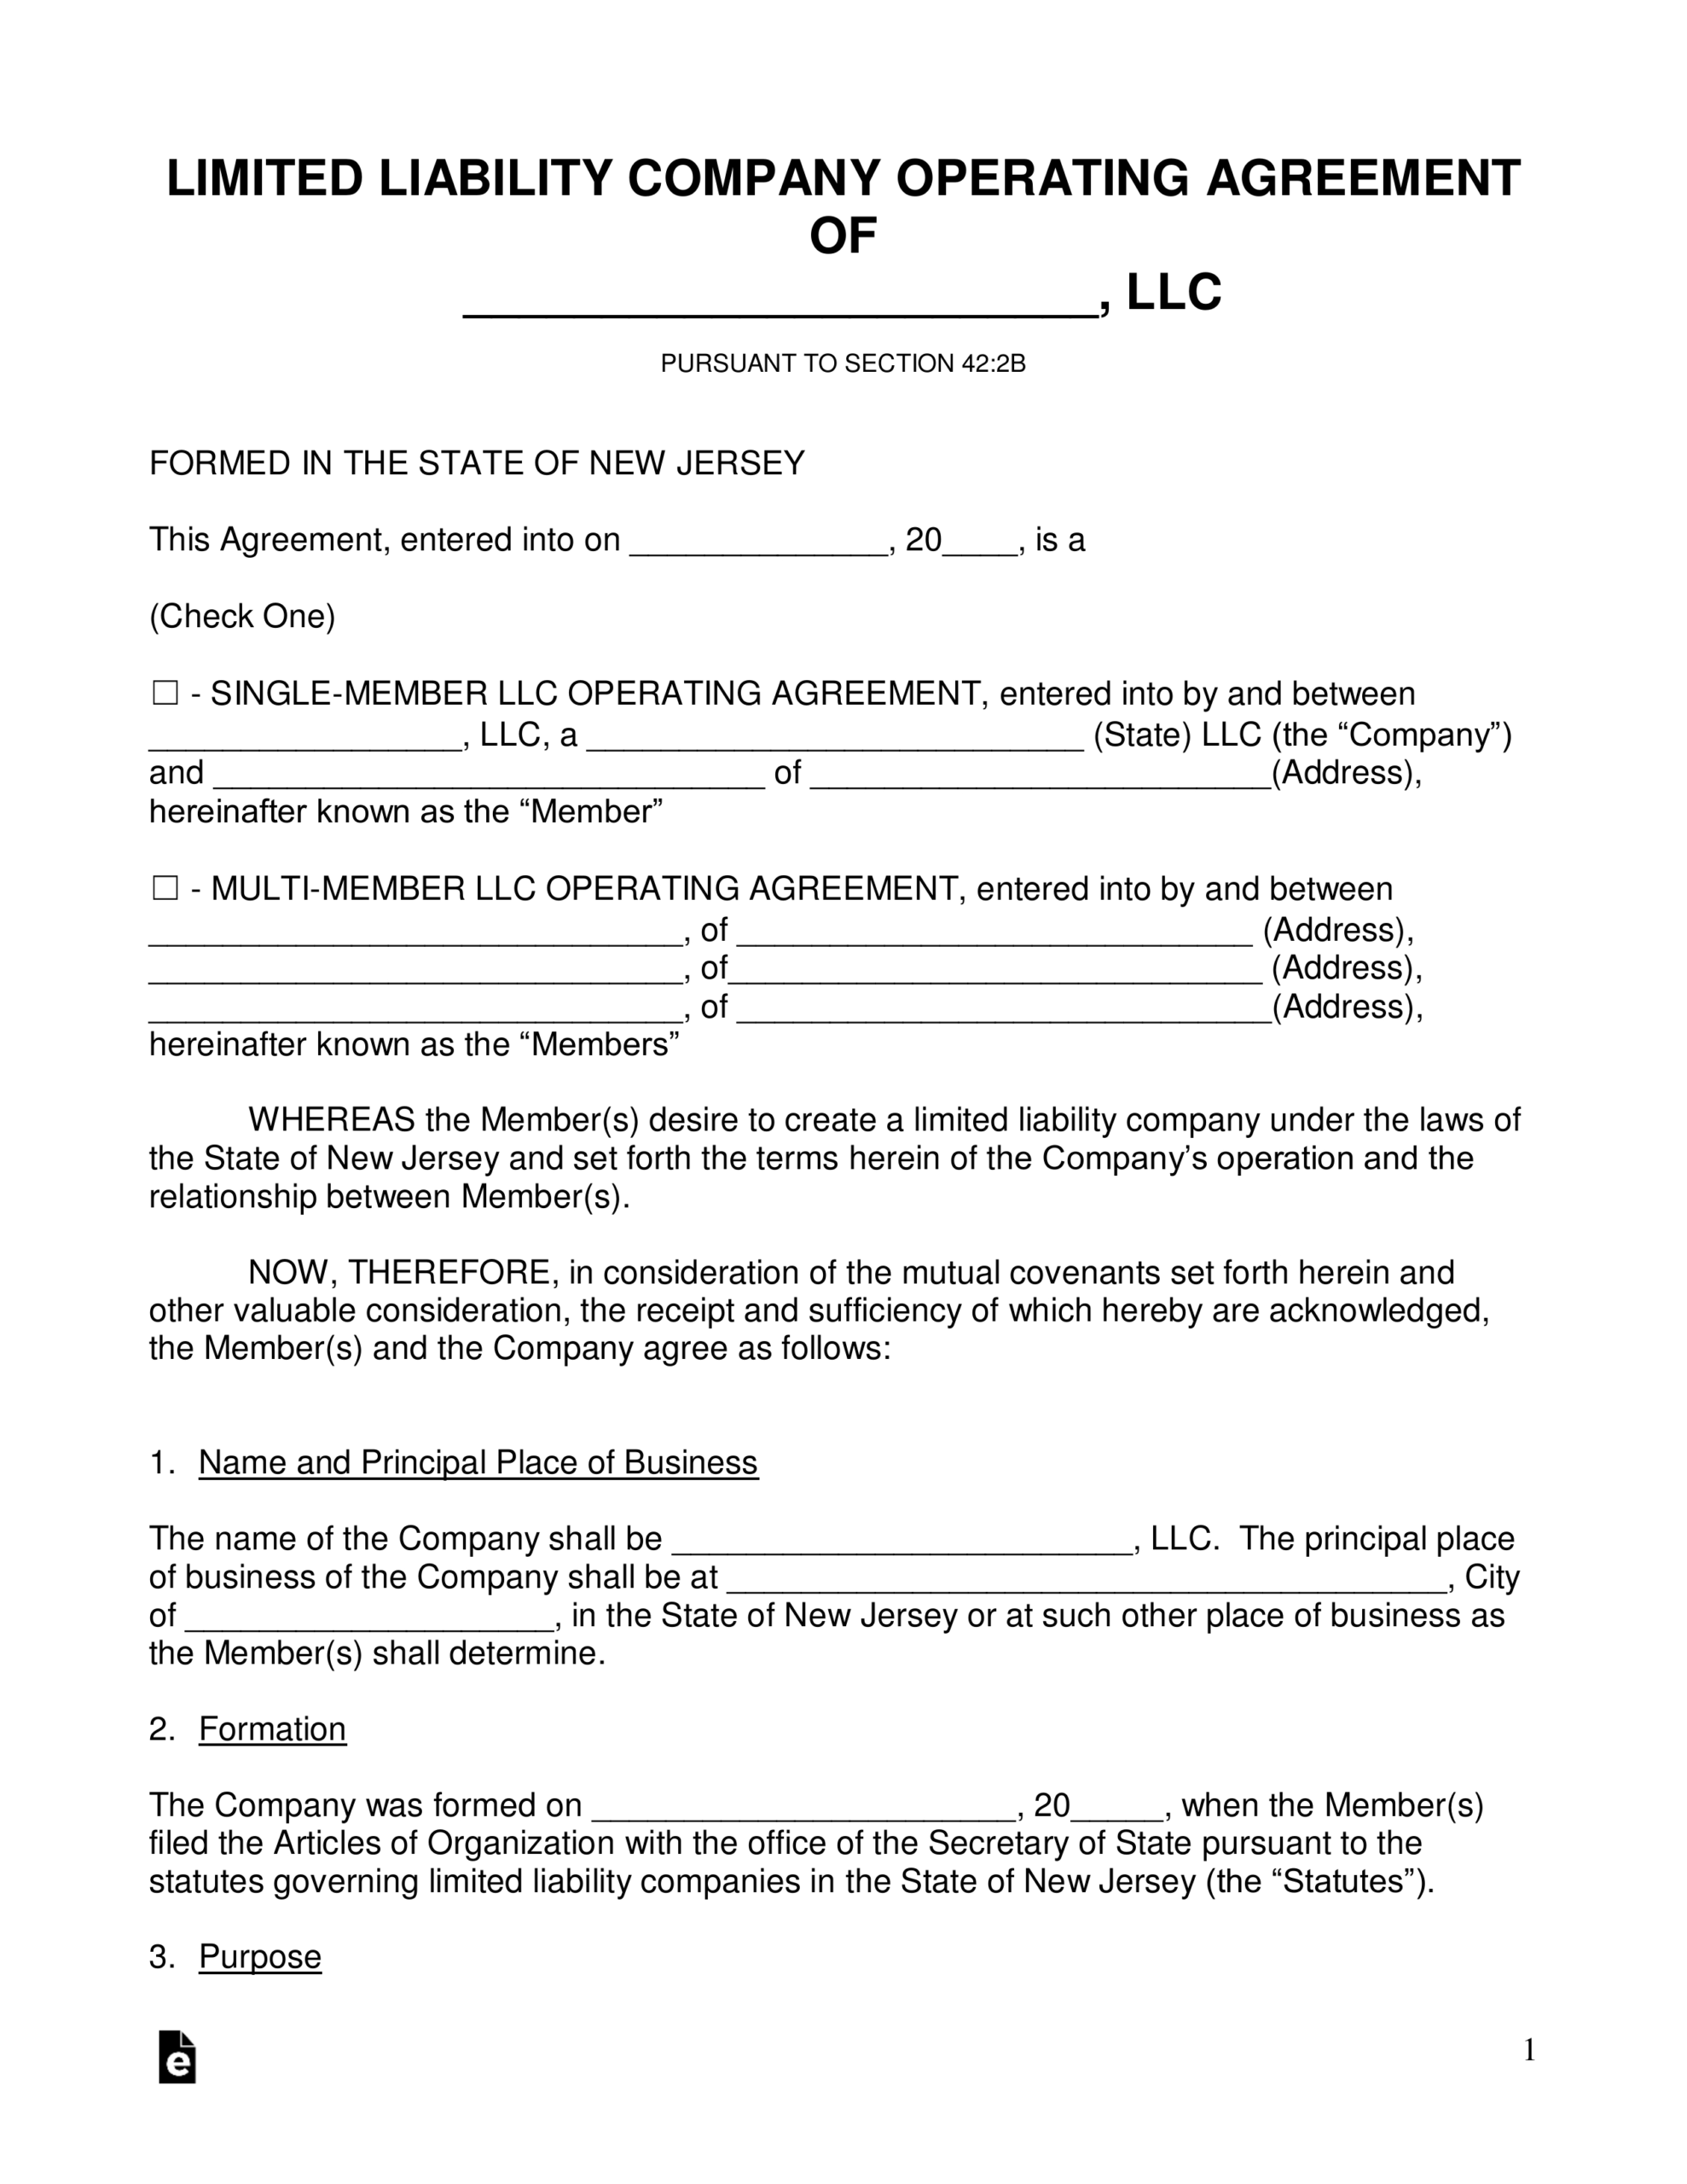 llc-operating-agreement-template-florida-in-word-and-pdf-formats